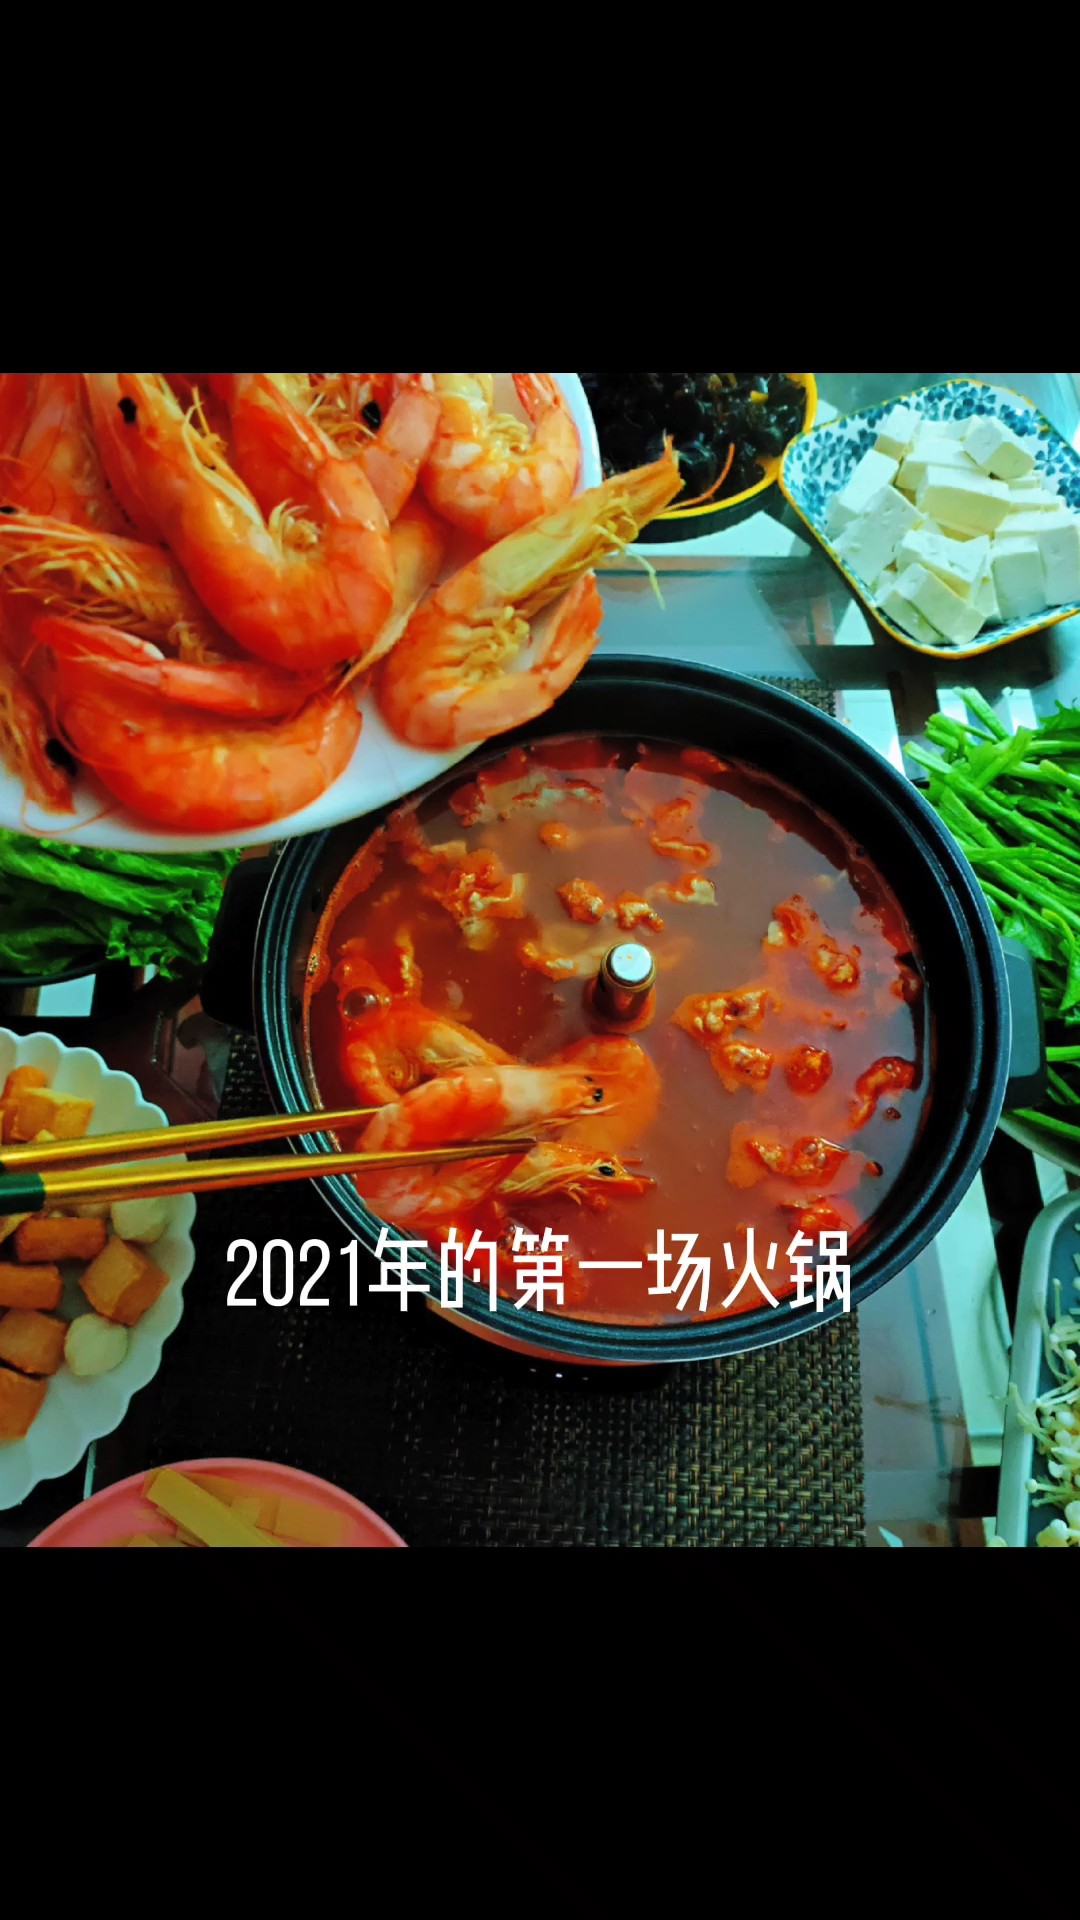 The Most Delicious Taste in The World is Hot Pot